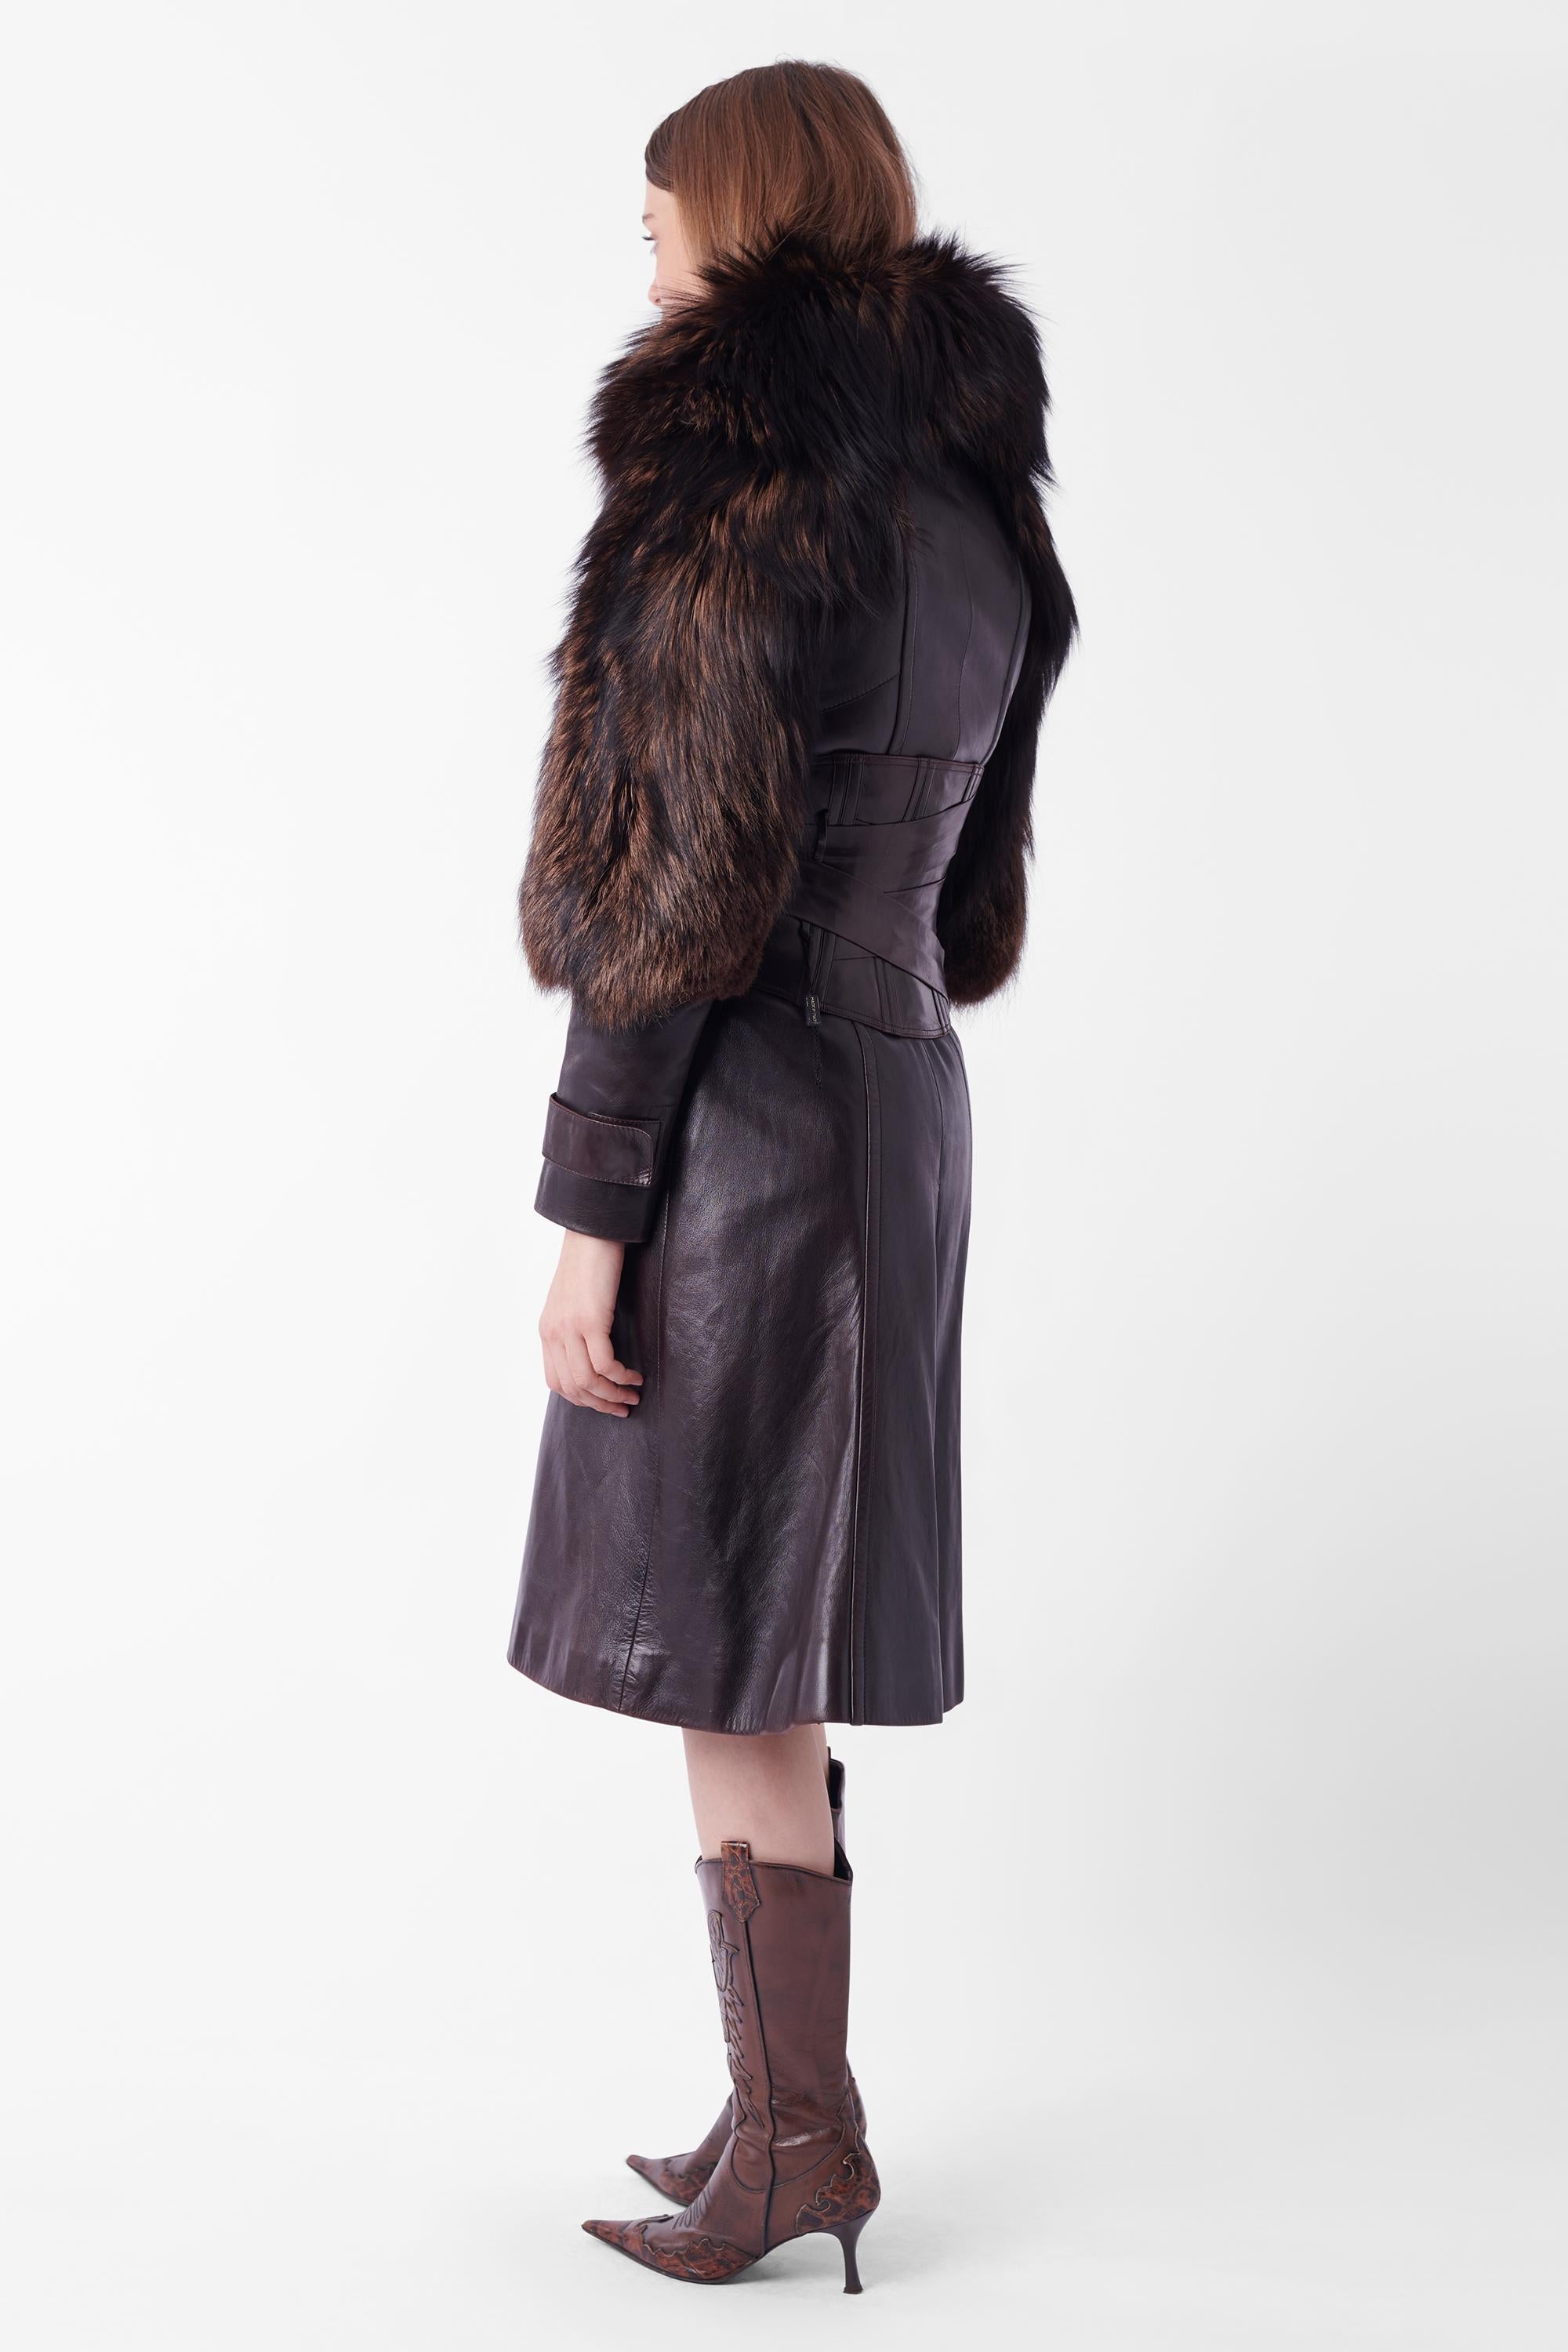 Nordic Poetry is very excited to present this incredible Tom Ford for Gucci Fall Winter 2003 leather coat with fur trimming  and corset belt, runway look 26. Coat features seaming, double front pockets, button wrist cuffs, fur arms and collar. Belt